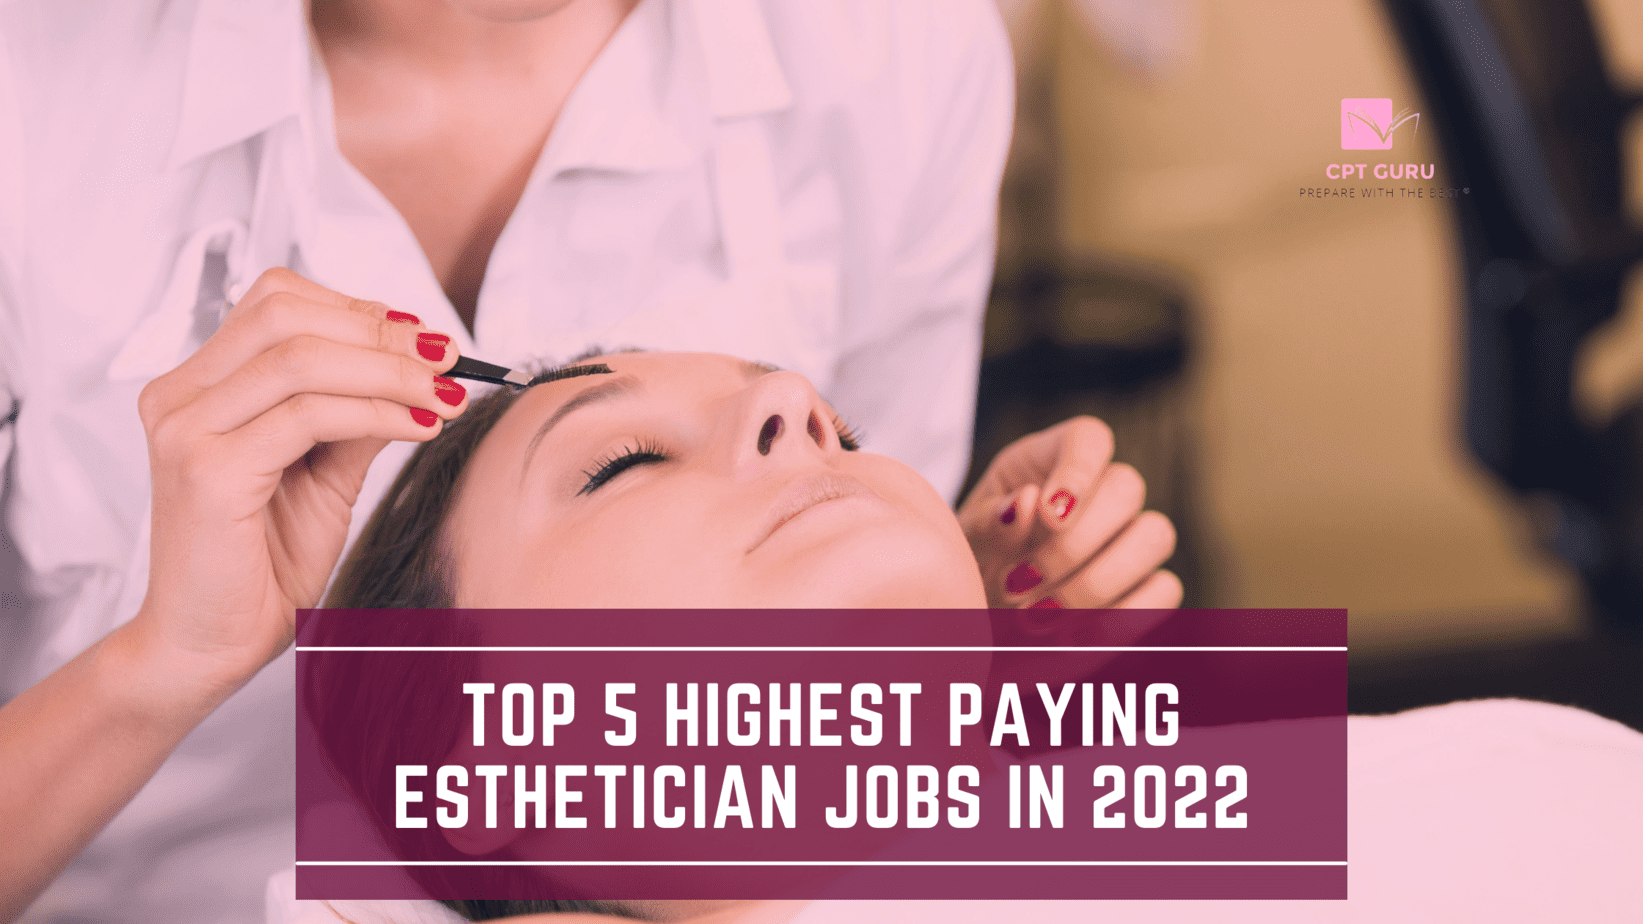 Top 5 Highest Paying Esthetician Jobs in 2022